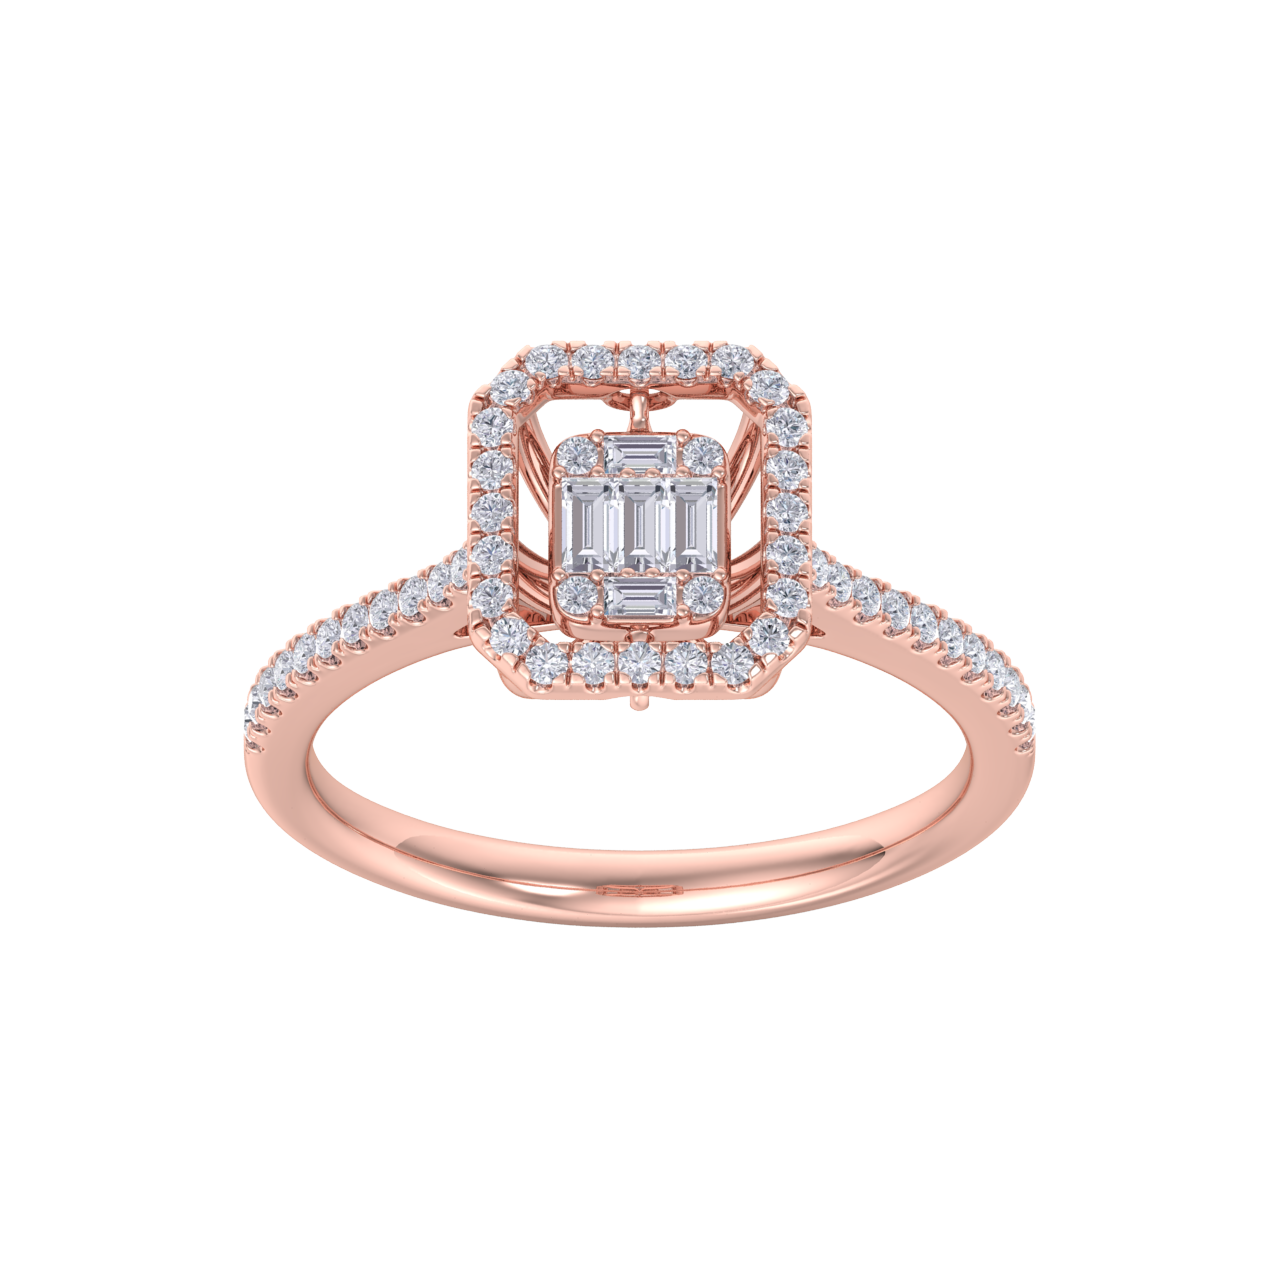 Square diamond ring in rose gold with white diamonds of 0.45 ct in weight